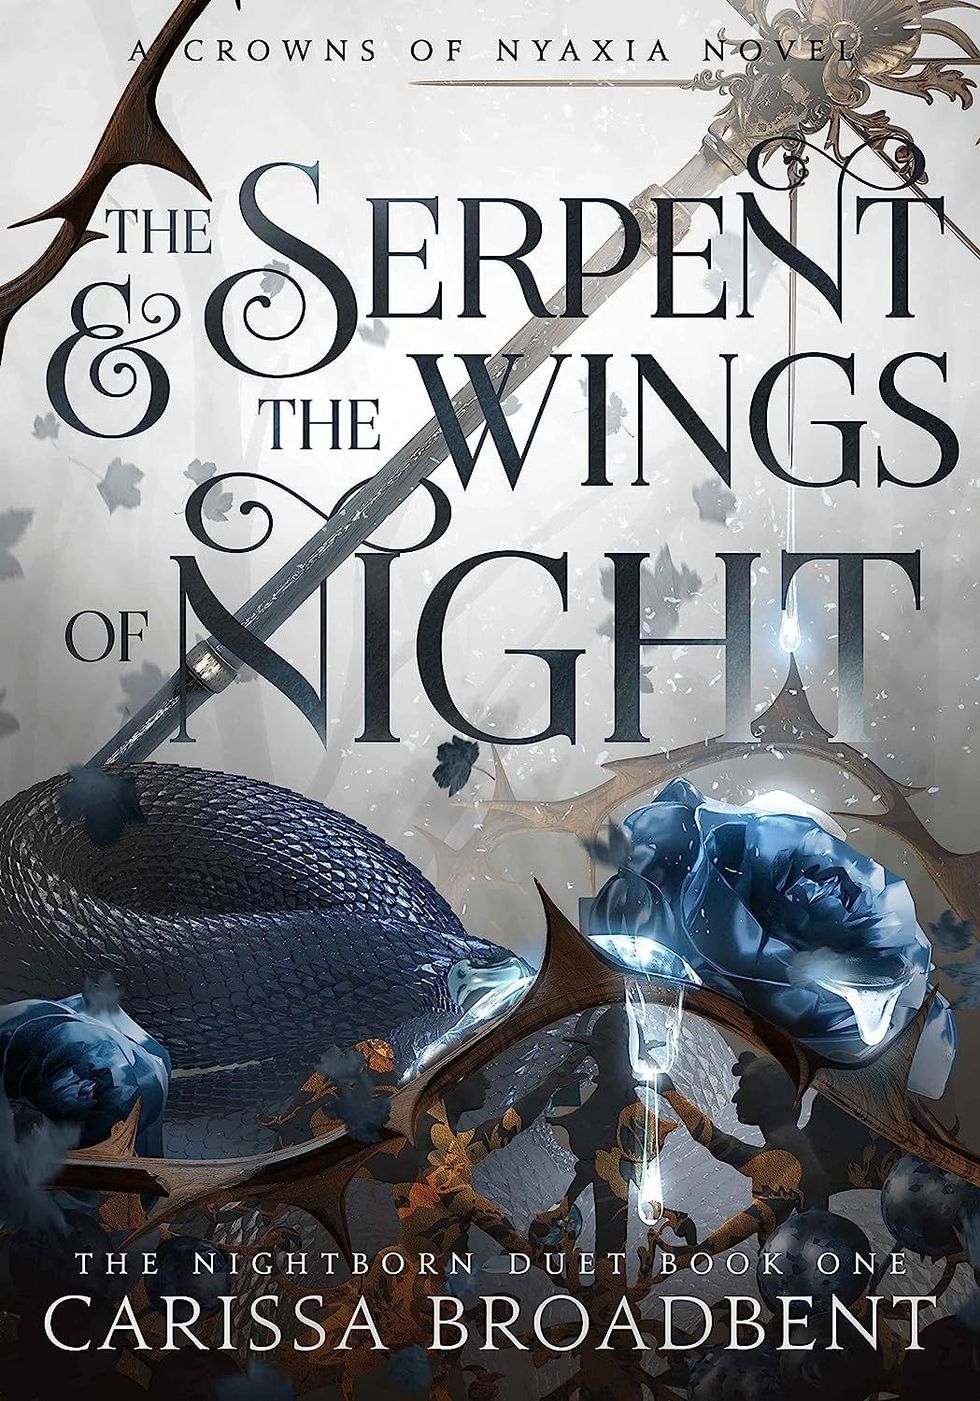 <i>The Serpent & the Wings of Night</i> by Carissa Broadbent